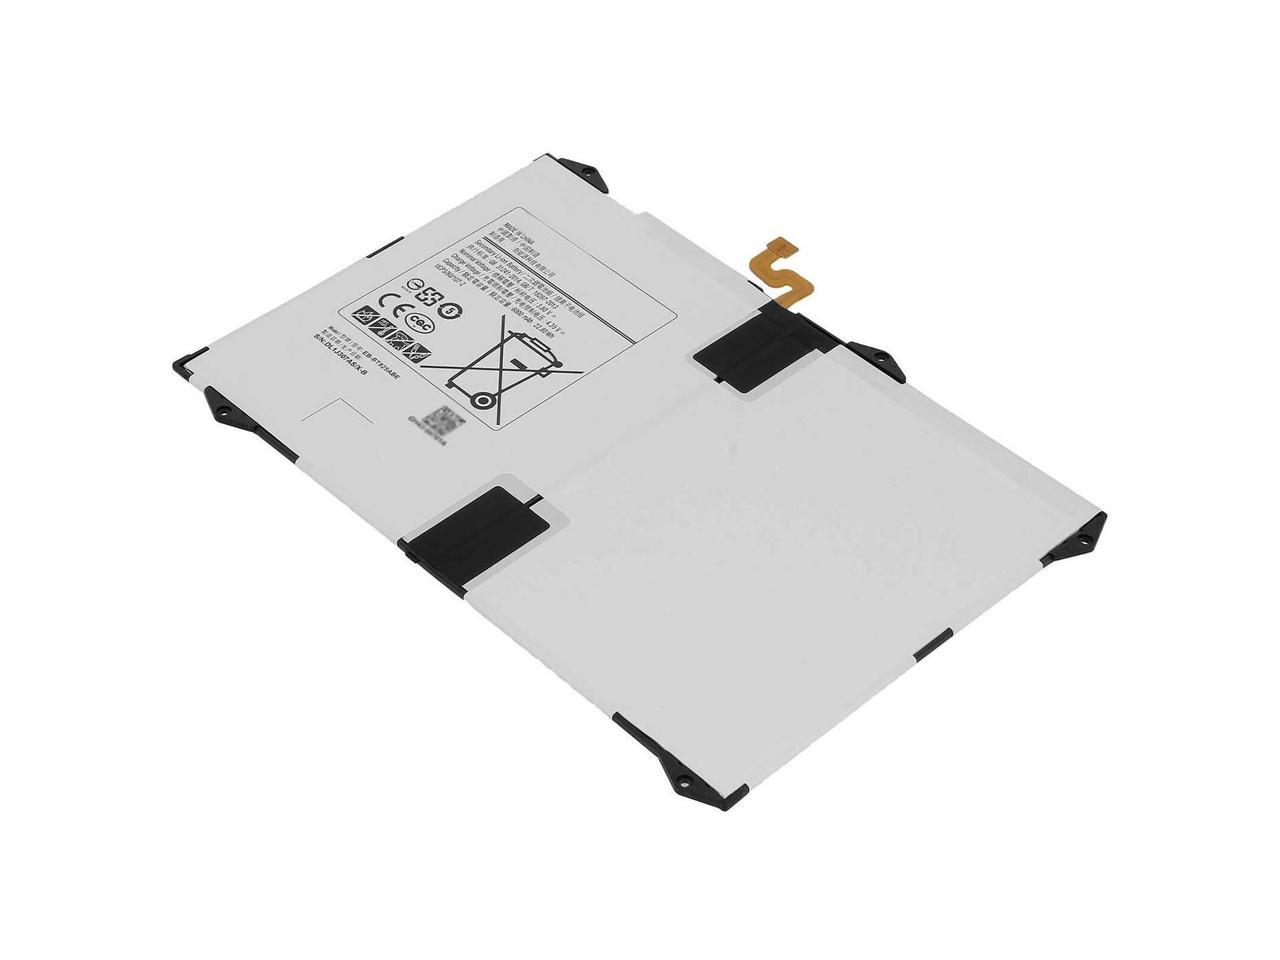 3.8V 22.8Wh 6000mAh BOWEIRUI EB-BT825ABE Tablet Battery Replacement for Samsung Galaxy Tab S3 9.7 inch SM-T820 SM-T825 Series SM-T825C SM-T825N0 SM-T825Y SM-T827V GH43-04702A EB-BT825ABA 